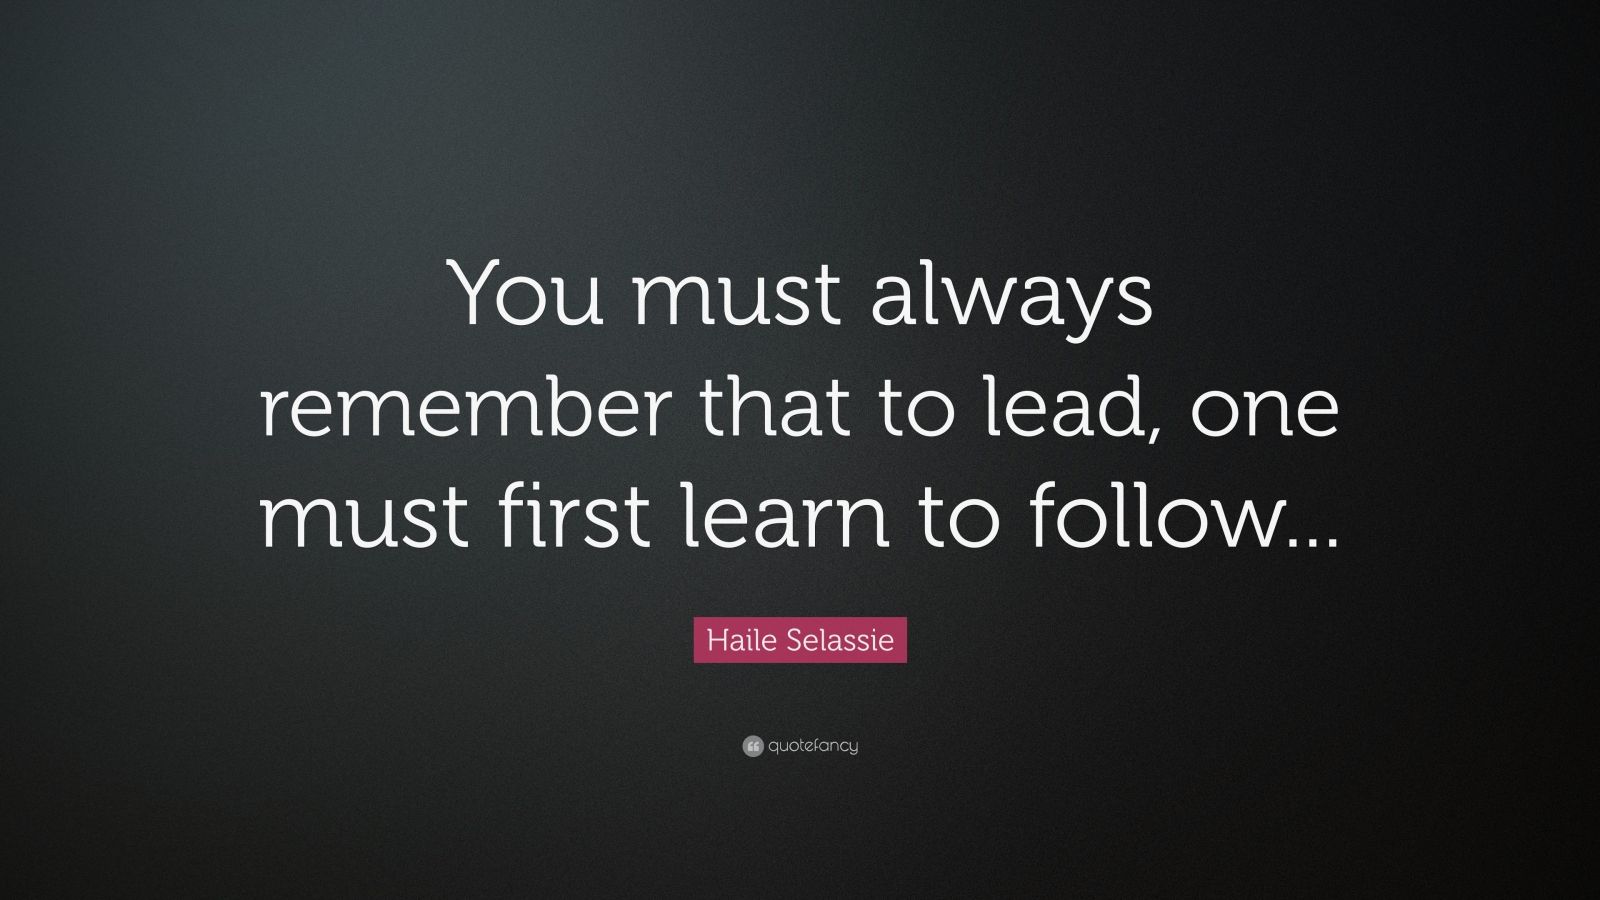 https://quotefancy.com/media/wallpaper/1600x900/2124382-Haile-Selassie-Quote-You-must-always-remember-that-to-lead-one.jpg